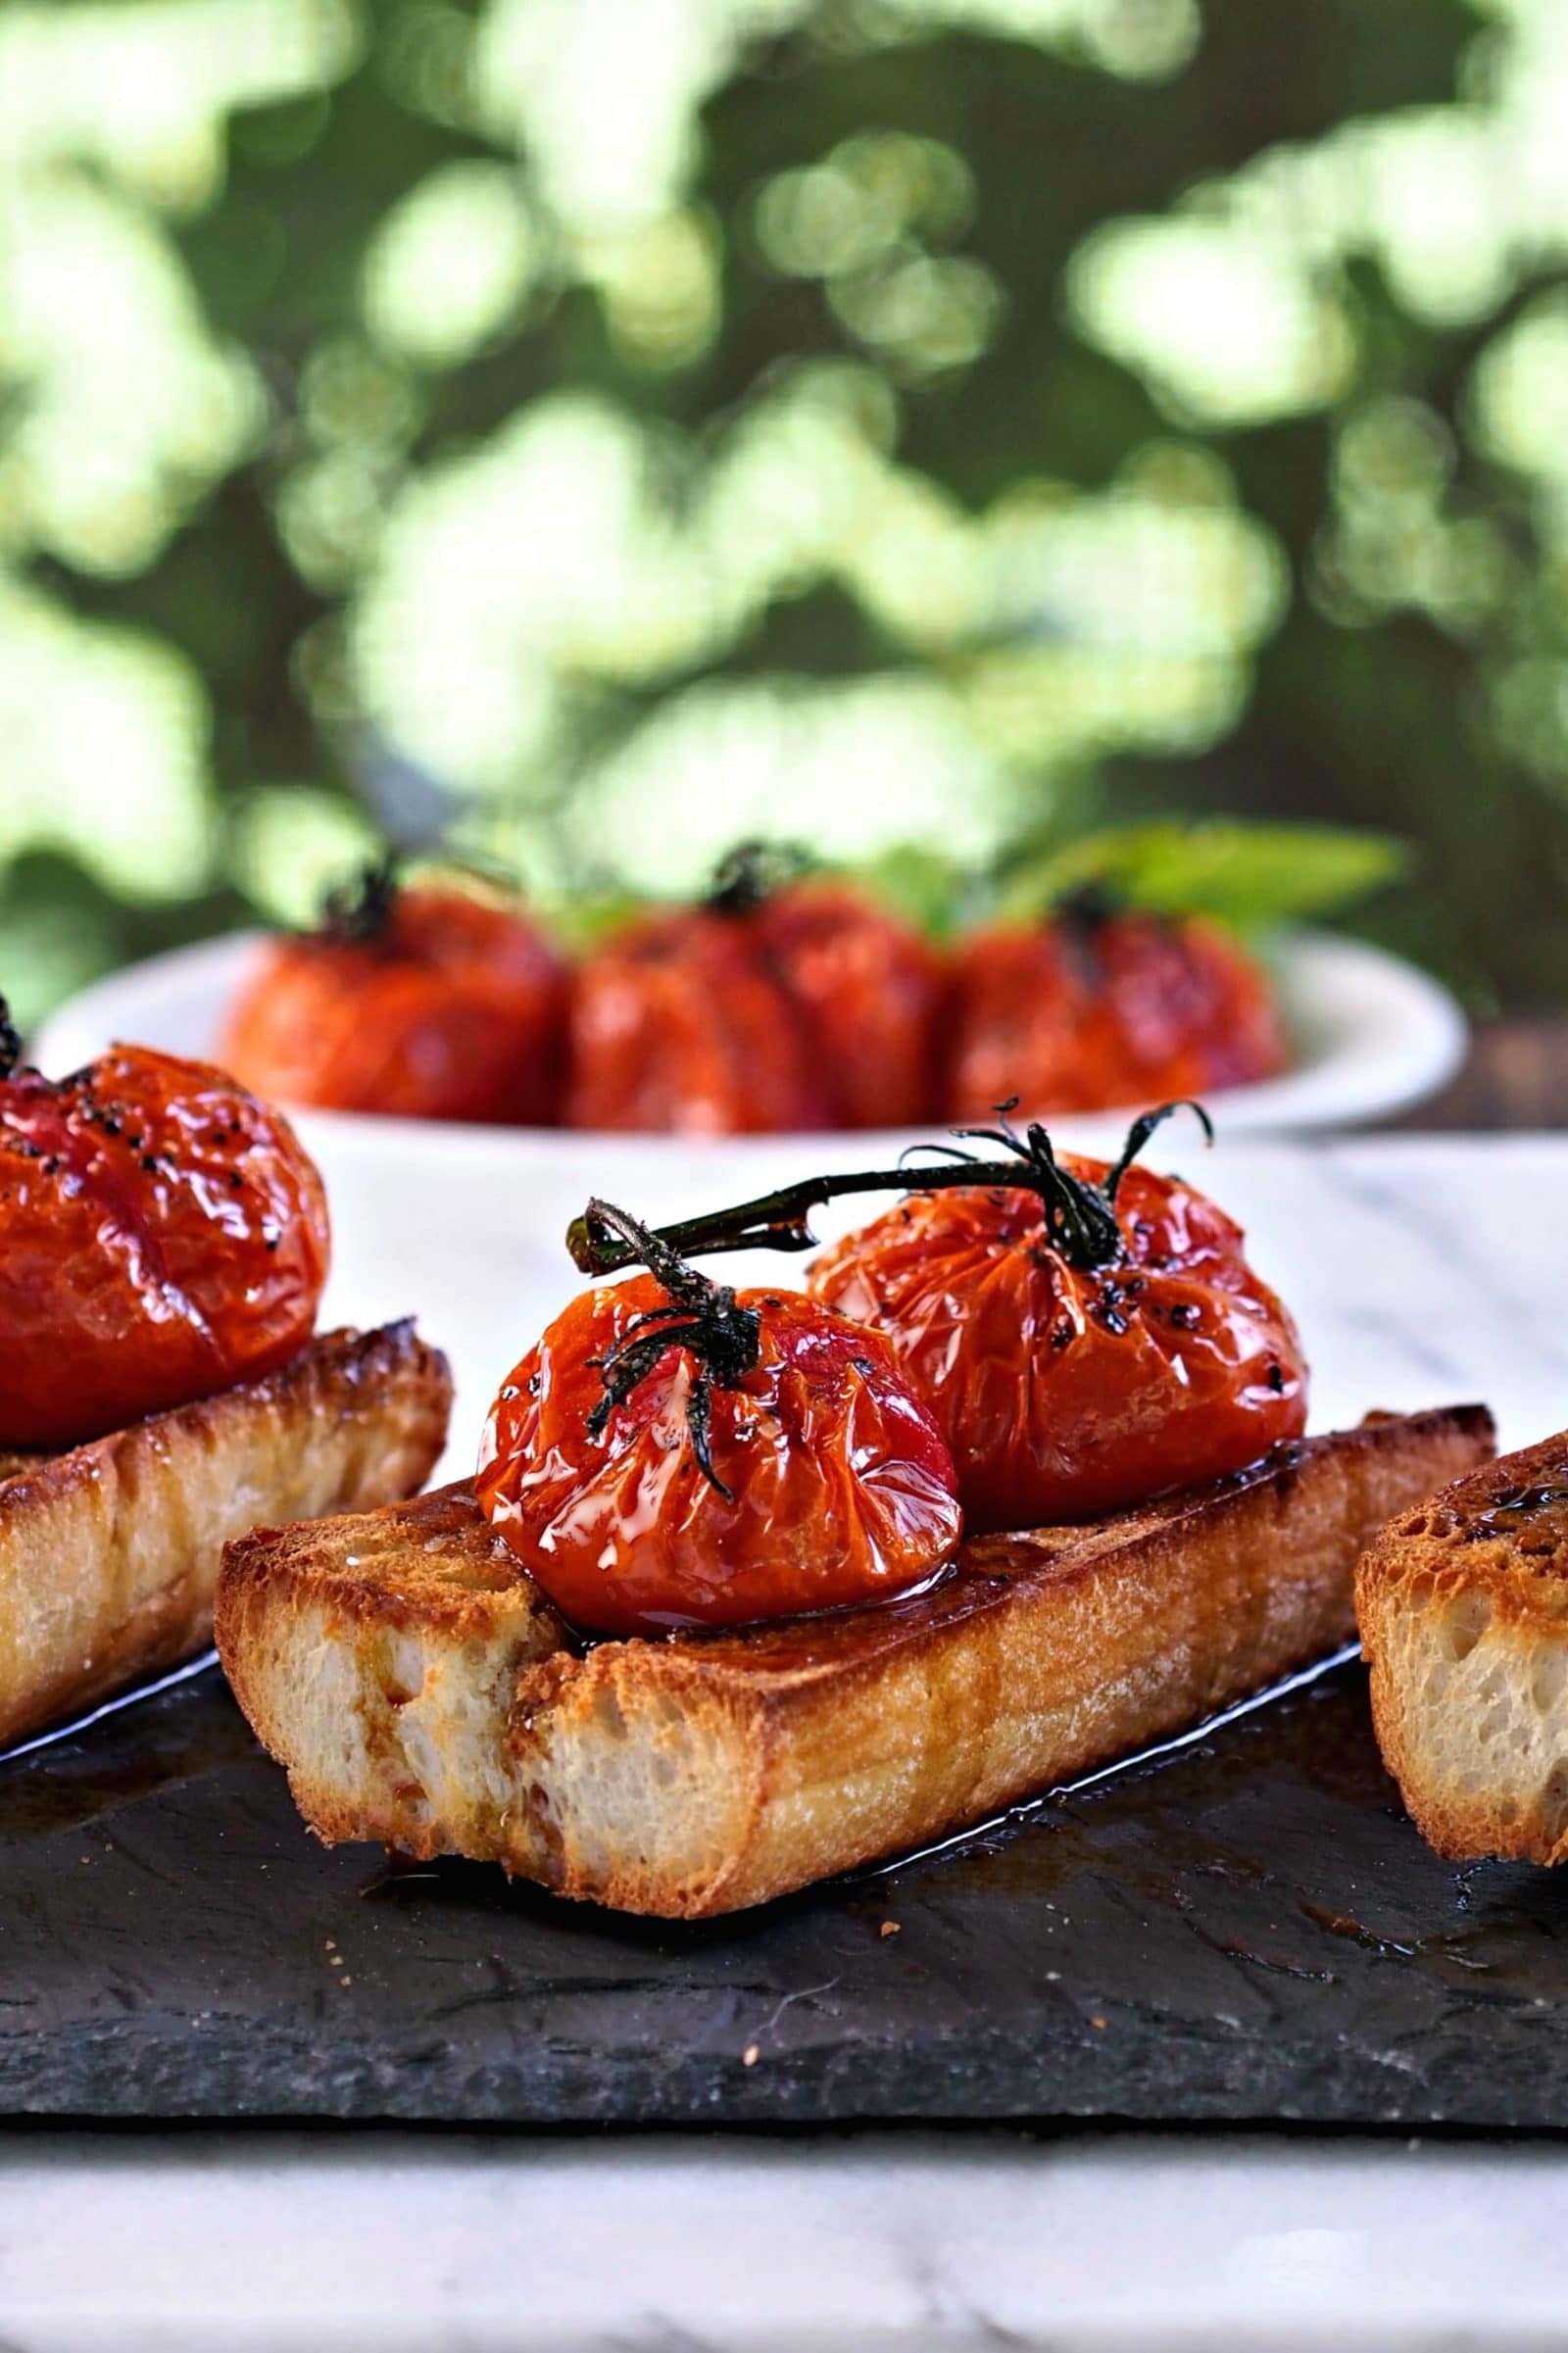 Roasted Tomato Bruschetta. Toasted Italian bread topped w/roasted tomatoes on the vine - the perfect appetizer for your favorite Italian meal. Simply Sated